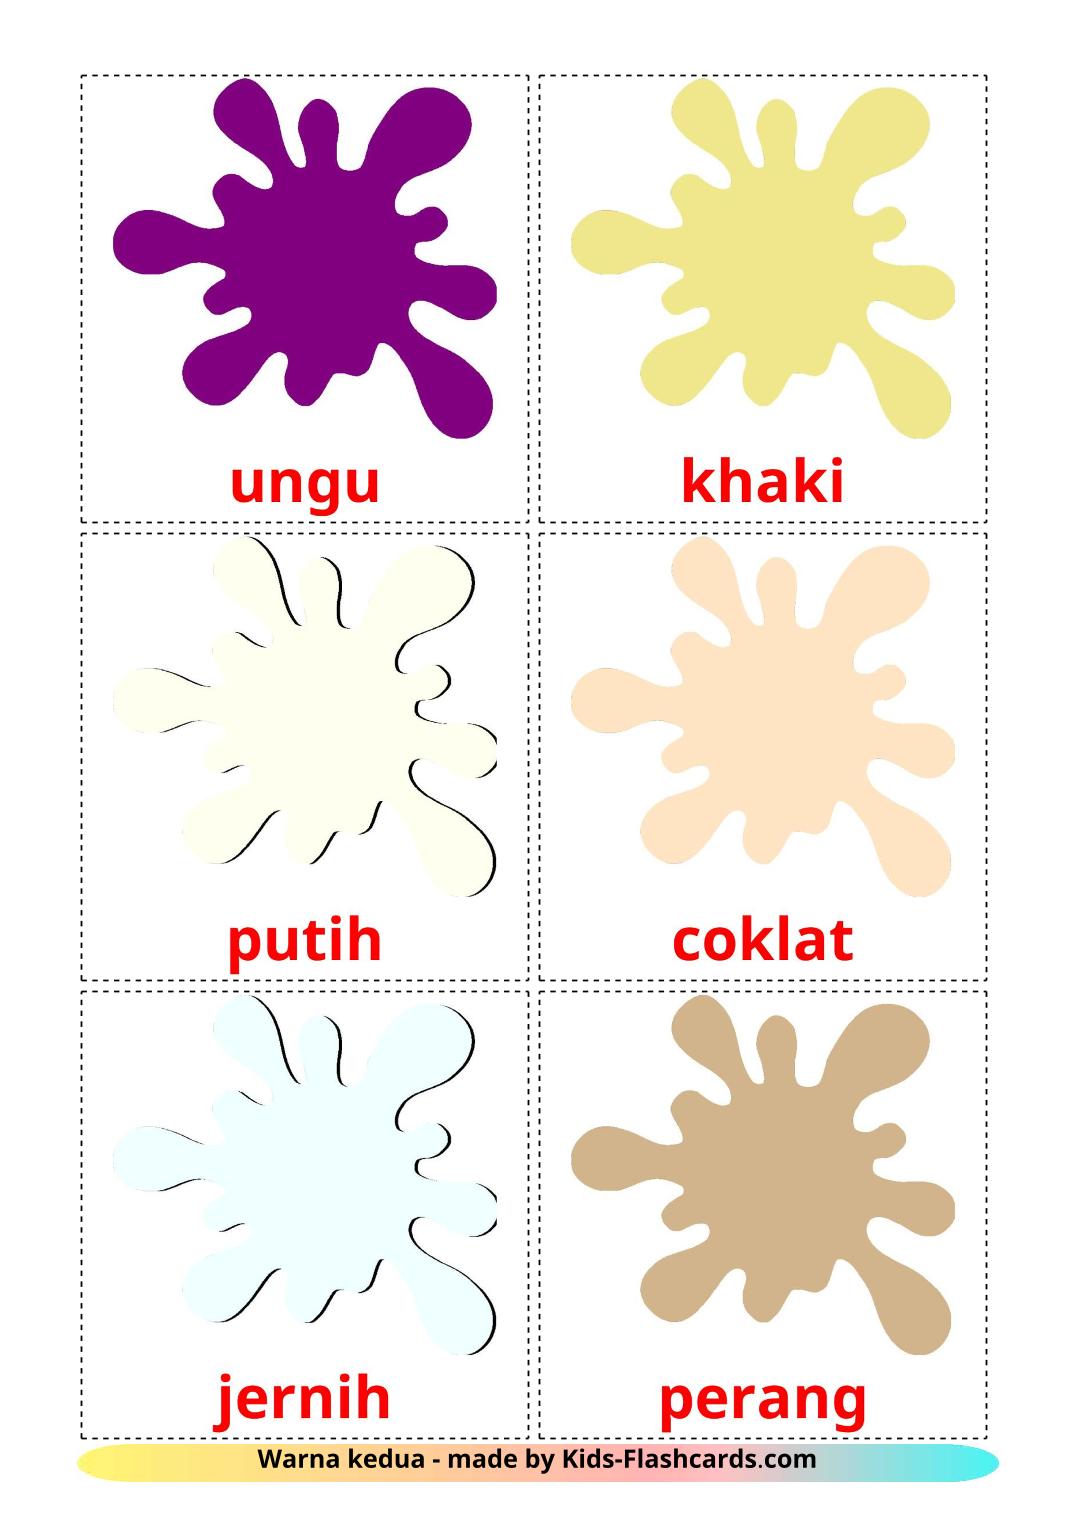 Secondary colors - 20 Free Printable indonesian Flashcards 